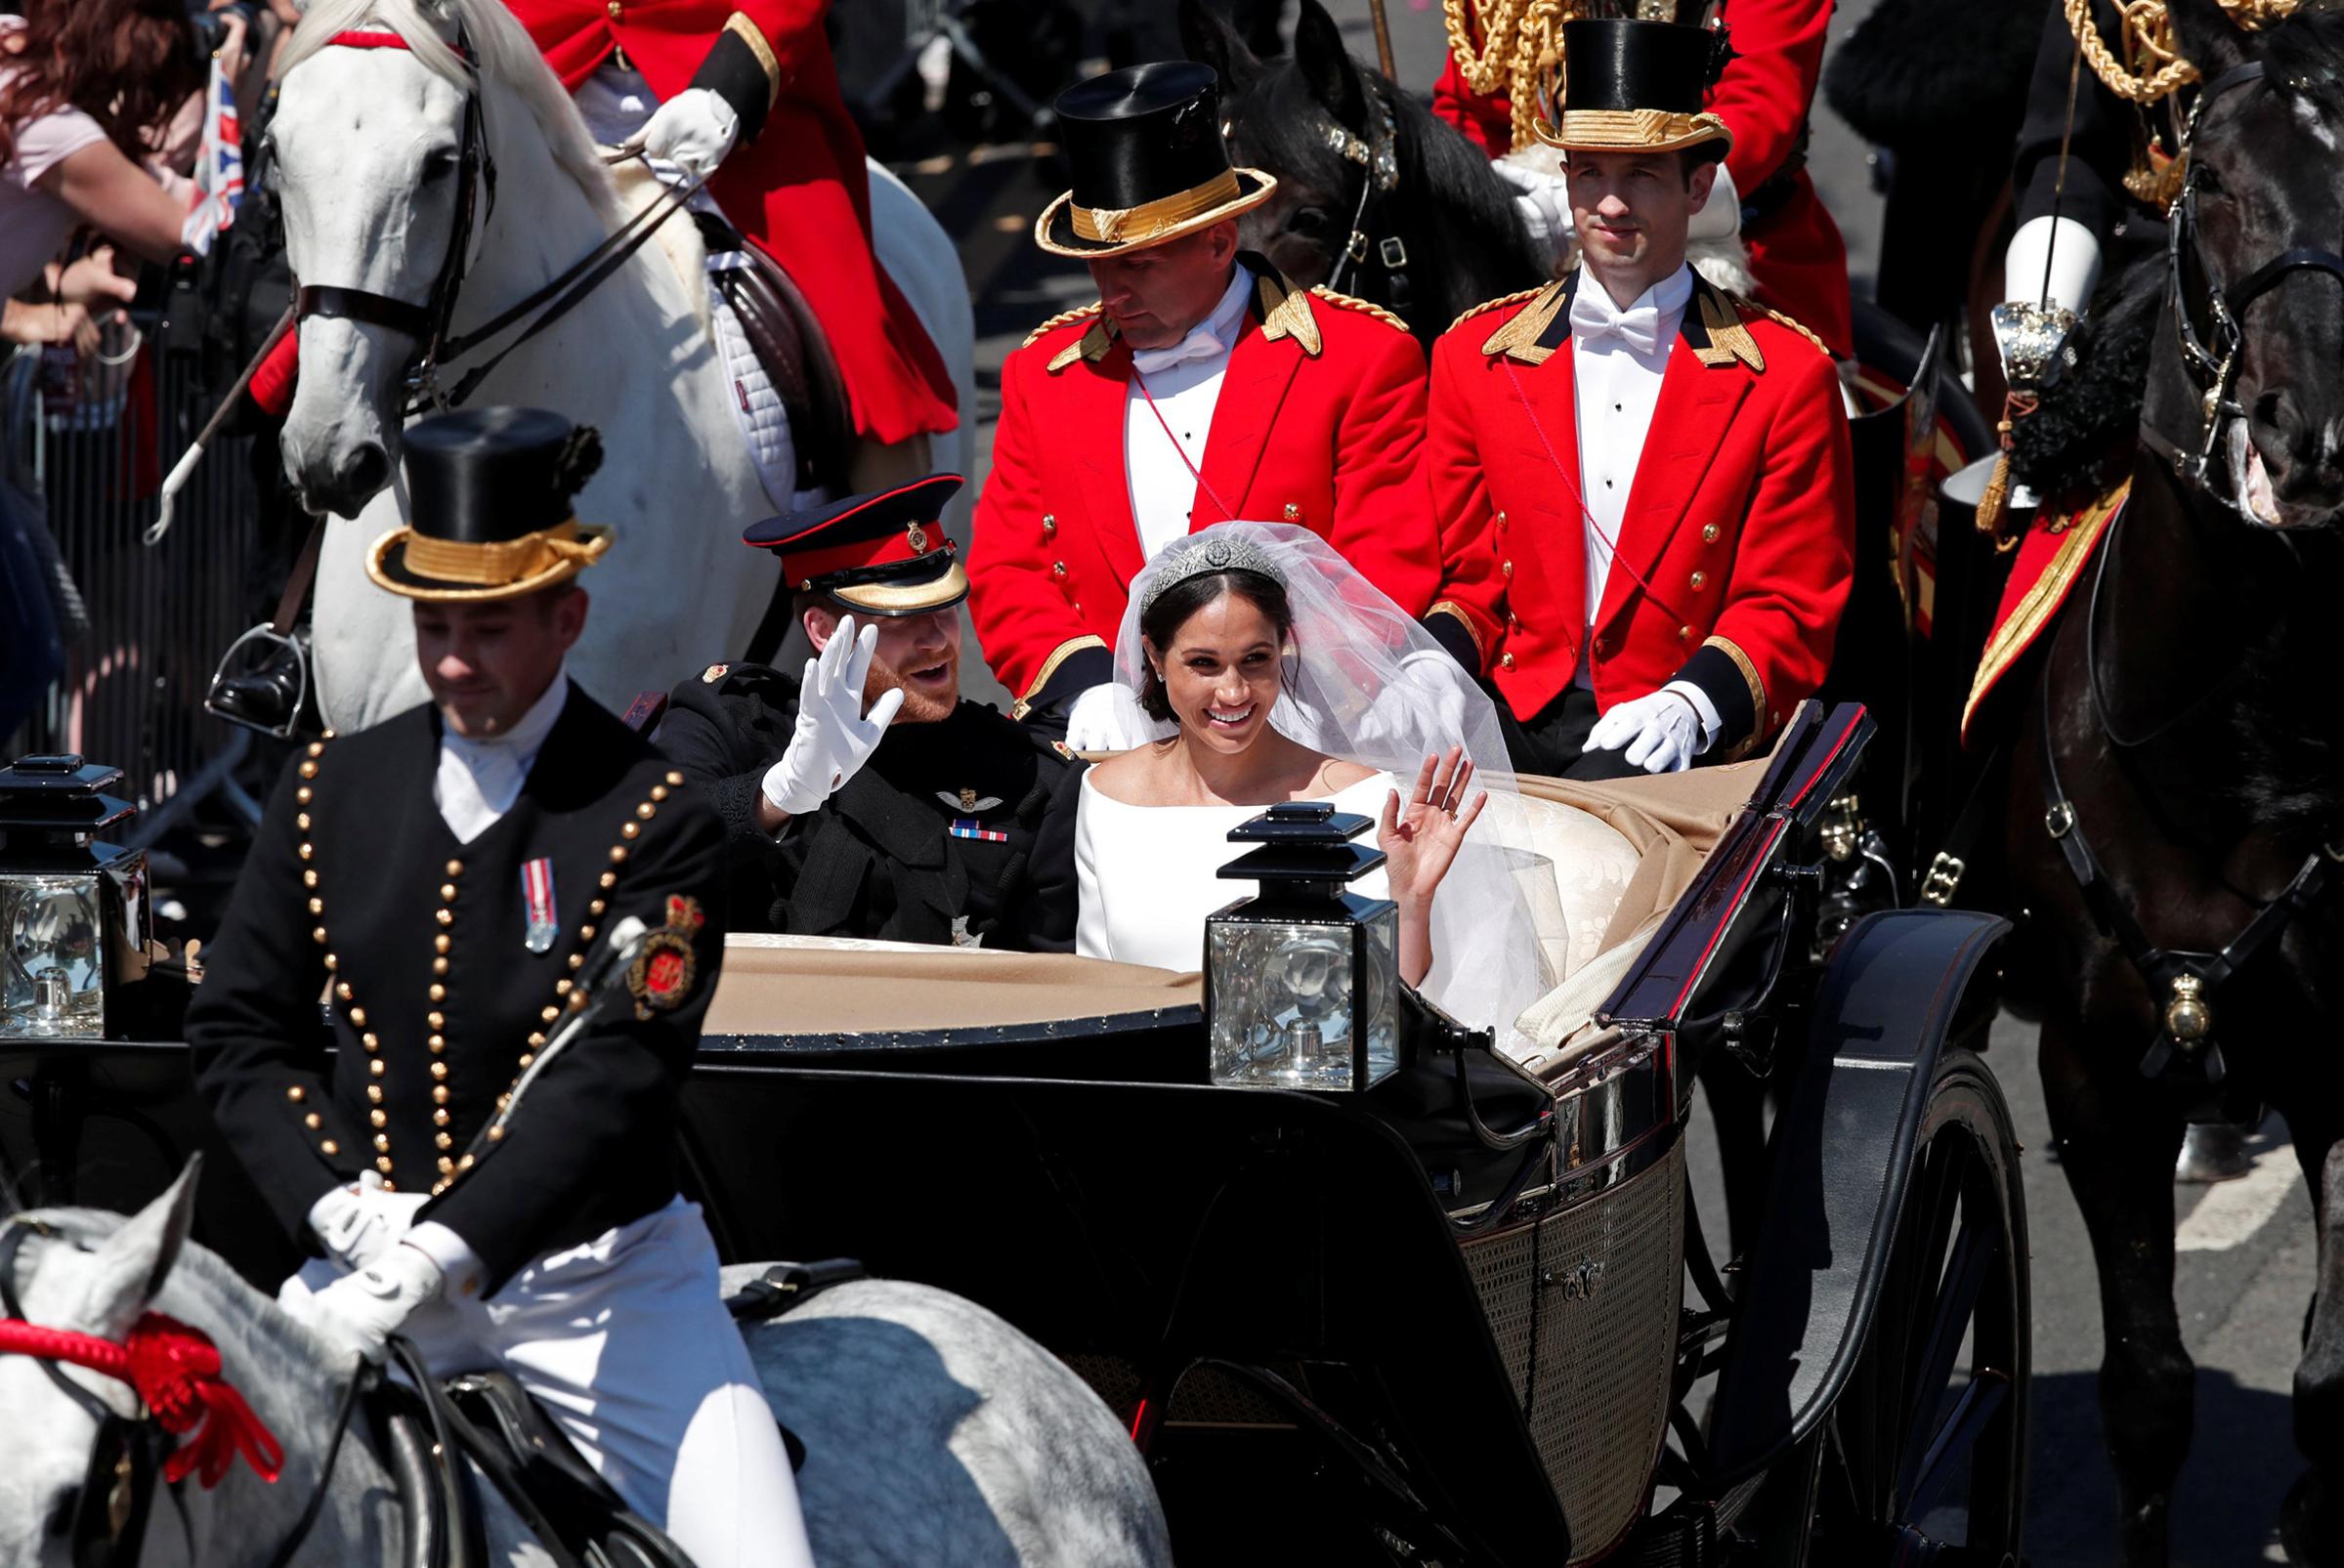 Prince Harry and Meghan Markle in a horse-drawn carriage after their wedding ceremony at St George's Chapel in Windsor Castle, May 19, 2018.